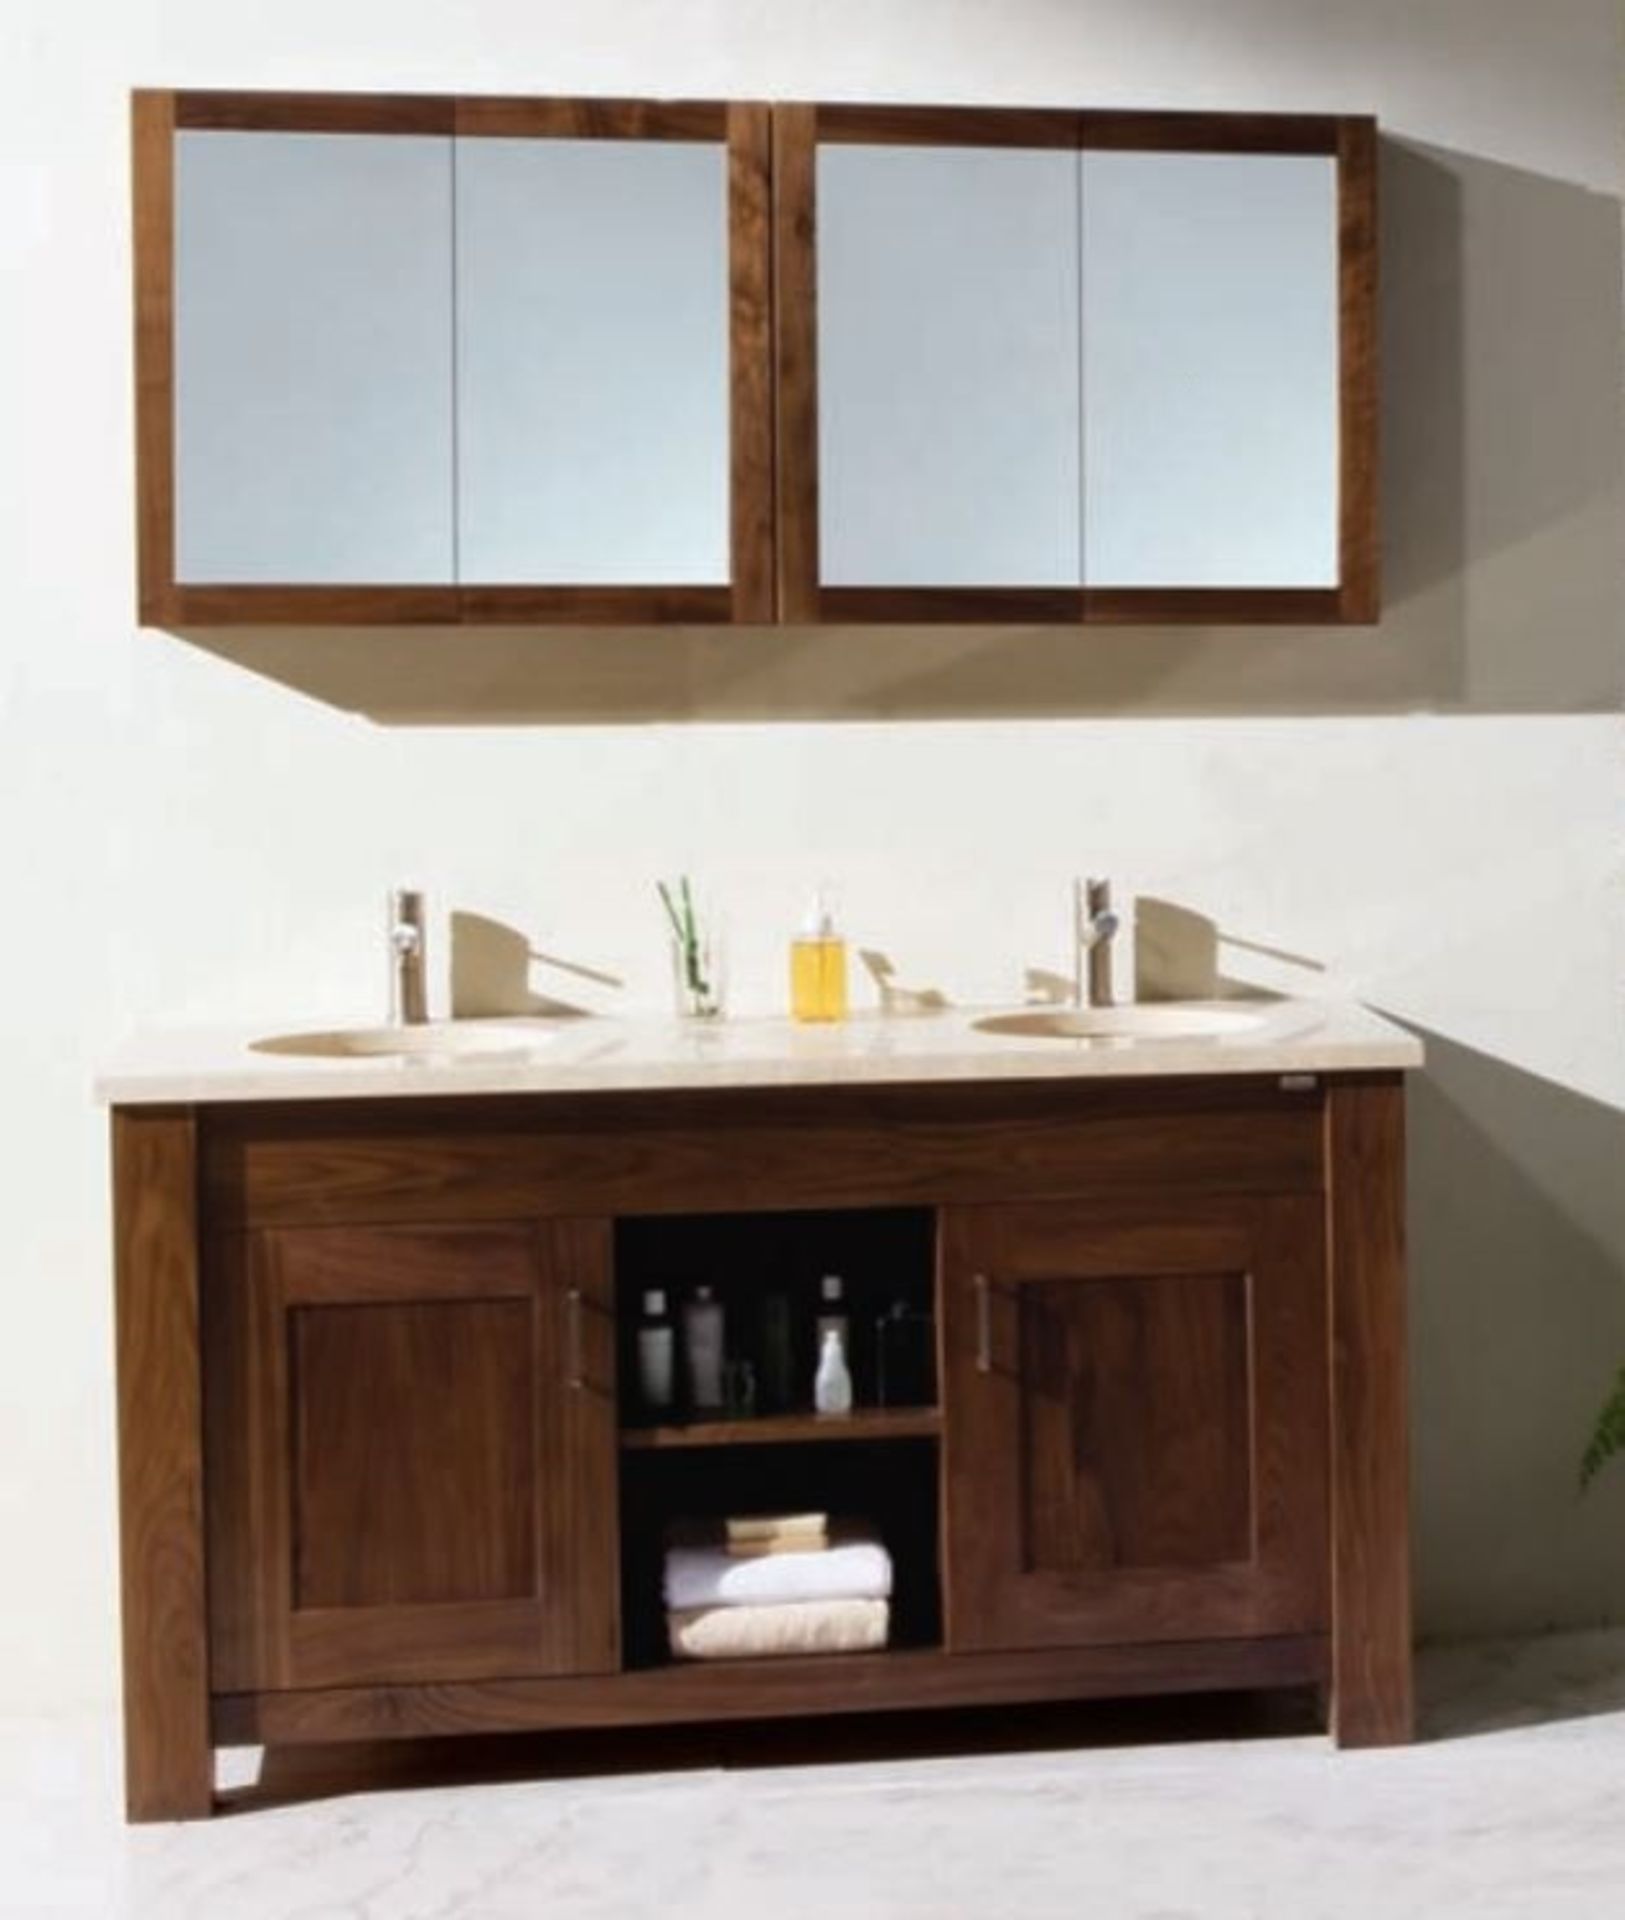 1 x Stonearth 'Finesse' Countertop 1500mm Tall Washstand - American Solid Walnut - RRP £1,900 - Image 3 of 12